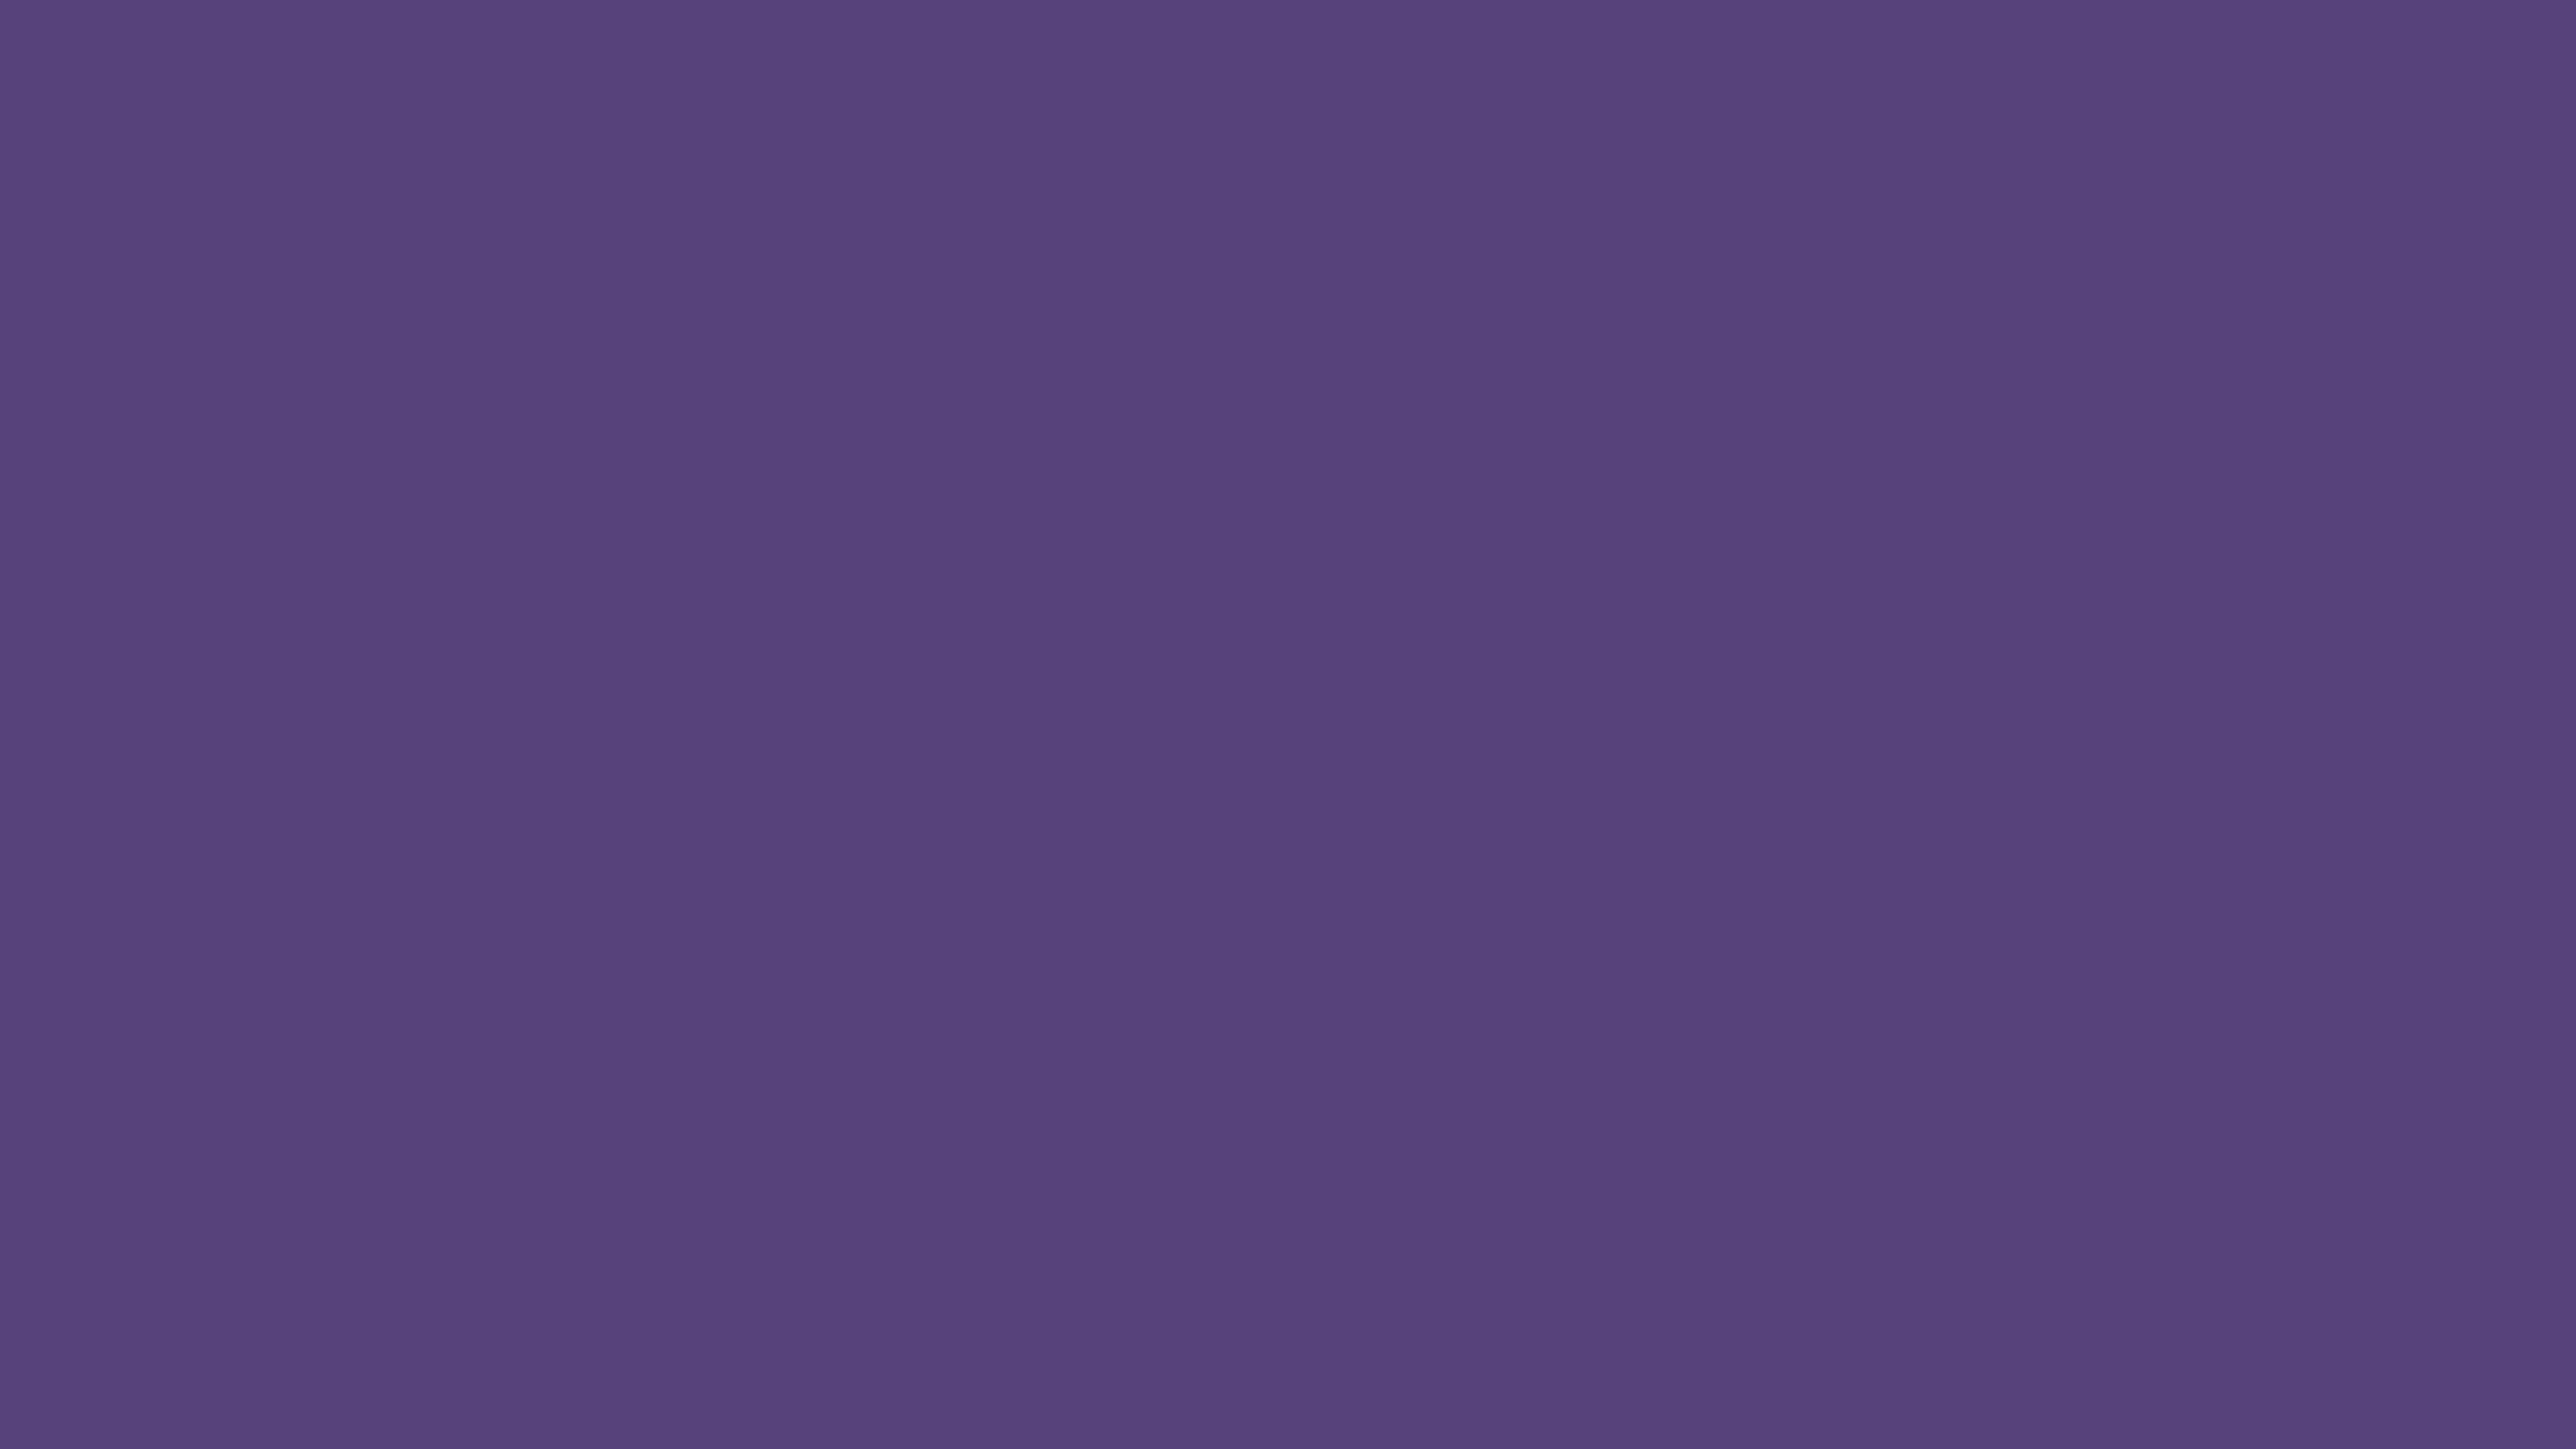 4096x2304 Cyber Grape Solid Color Background